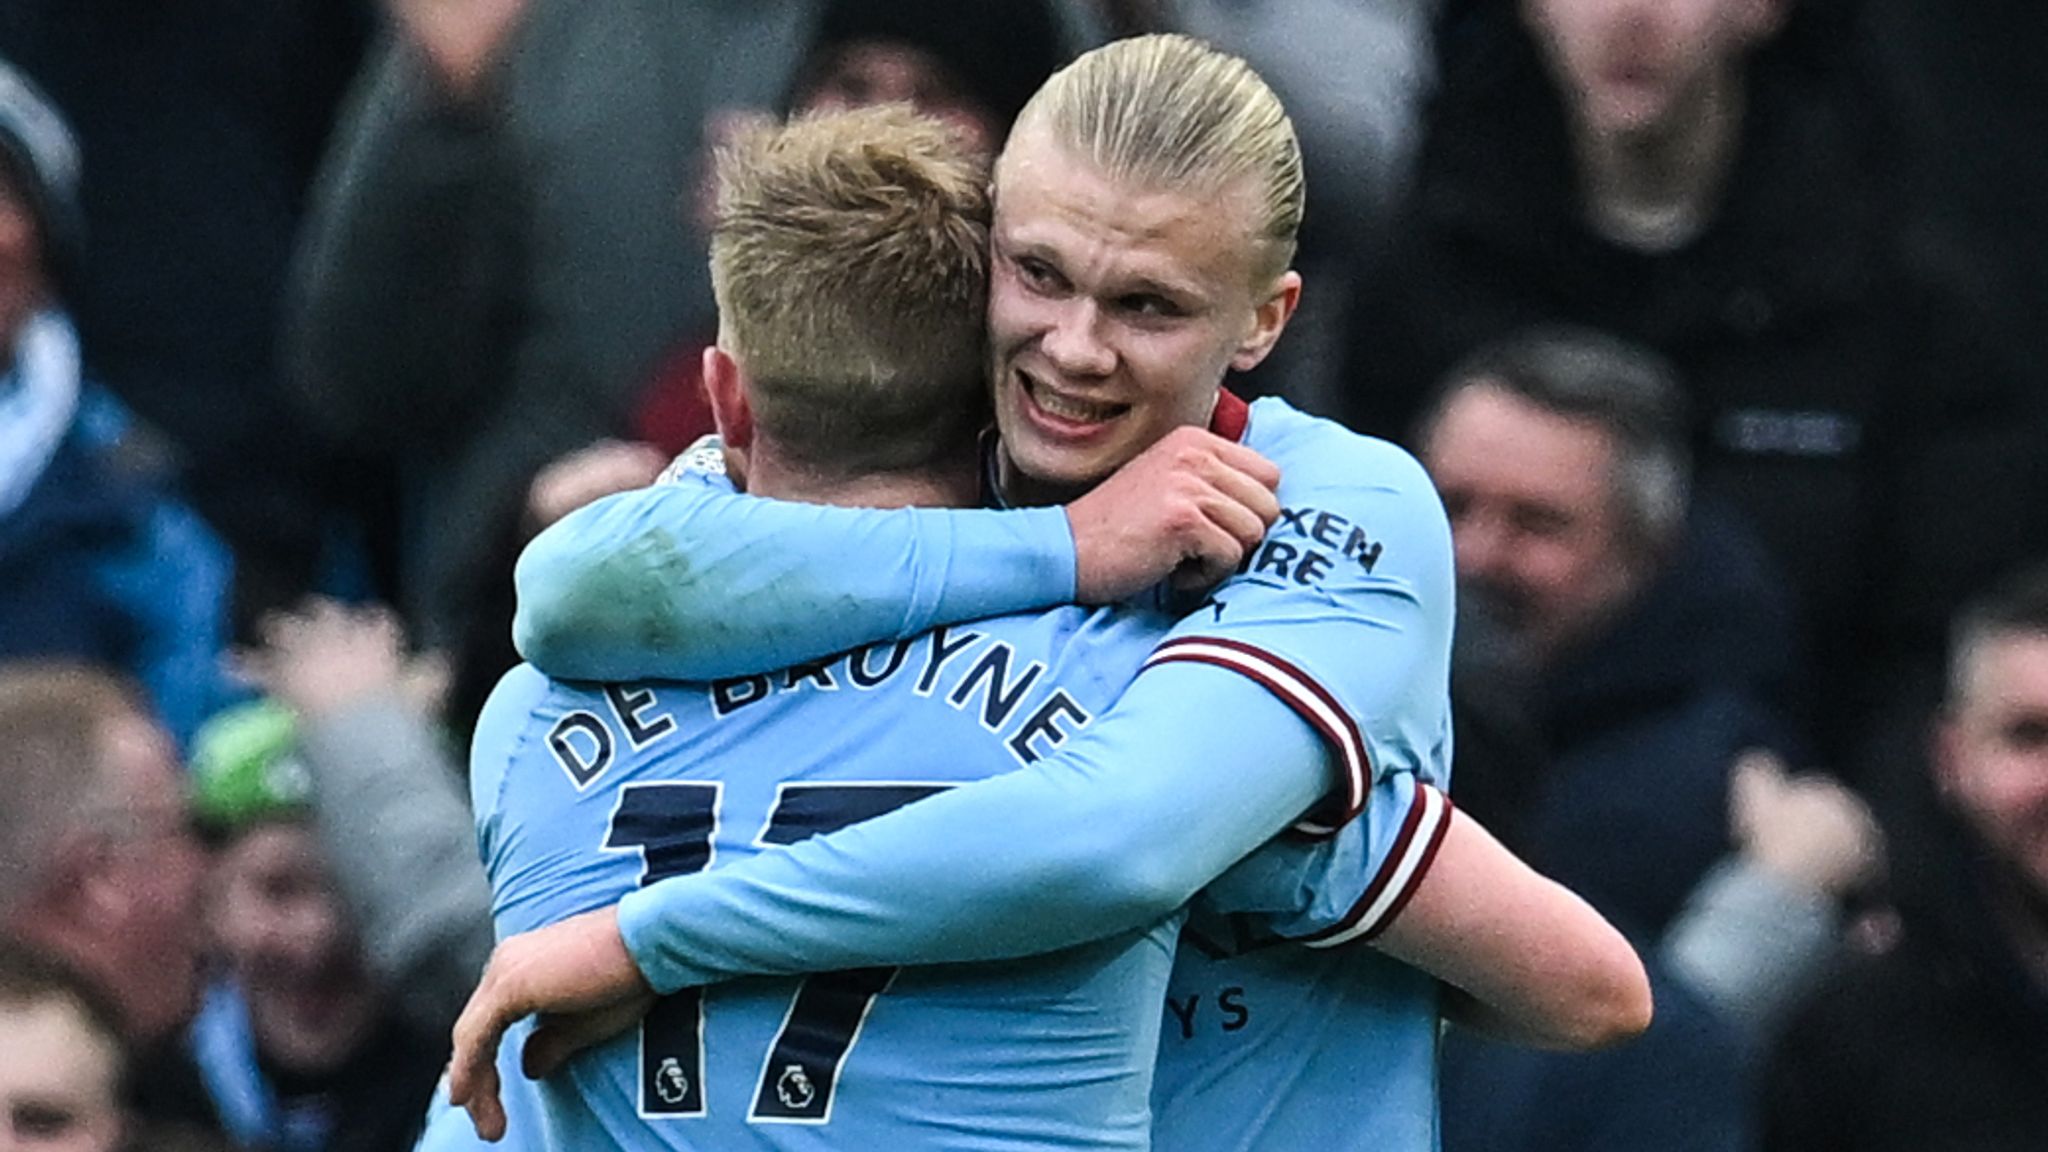 Man City 3-0 Wolves Erling Haaland hat-trick takes him to 25 Premier League goals and keeps pressure on Arsenal Football News Sky Sports